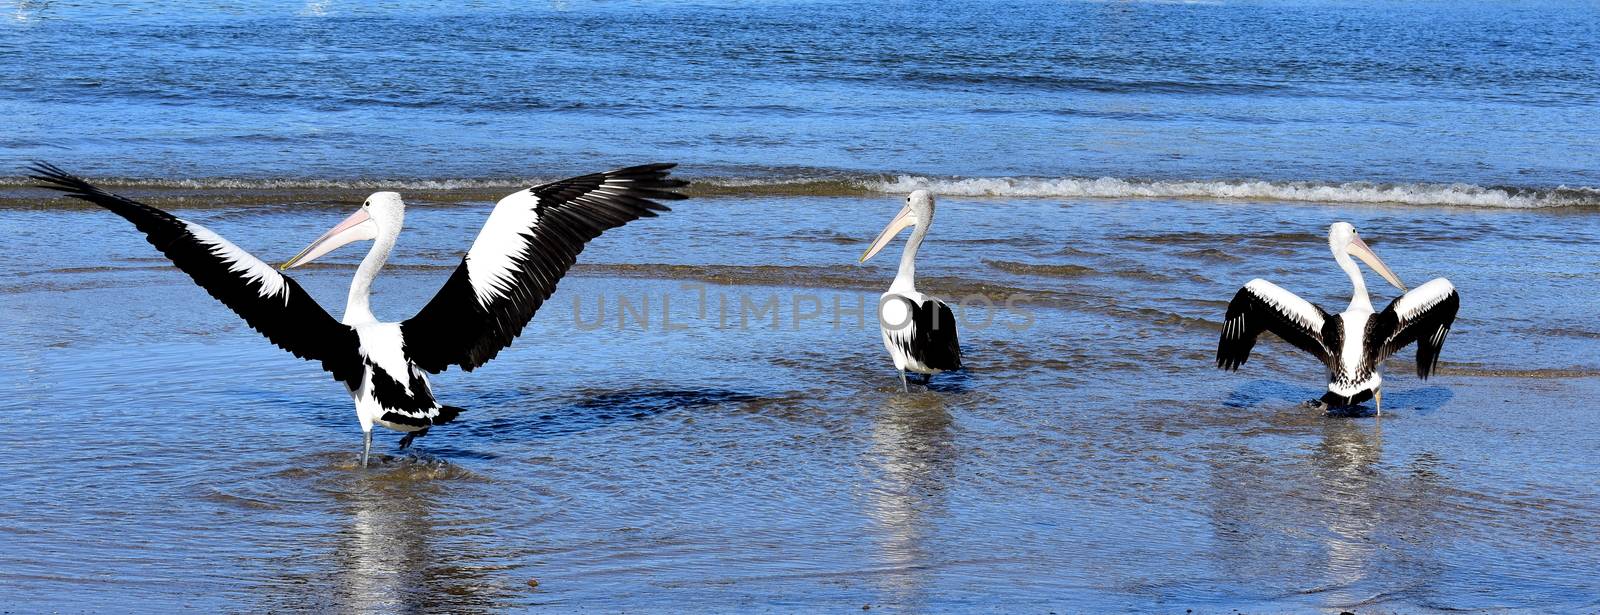 Three pelicans playing at the beach.